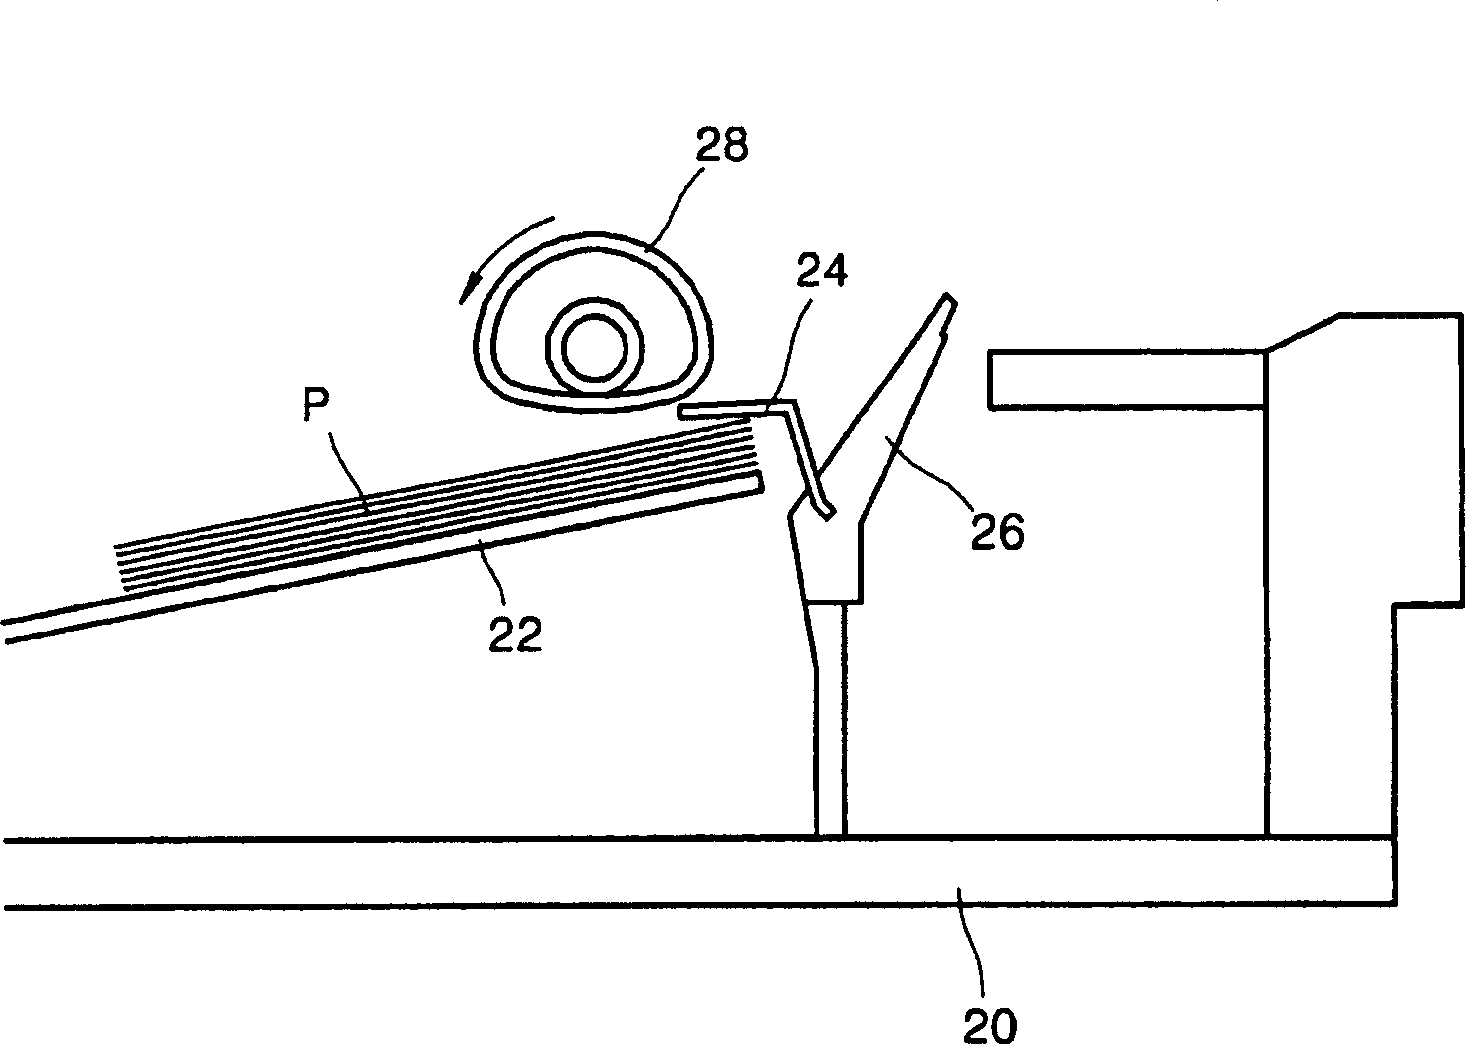 Paper feeding apparatus for printer having double feed prevention unit